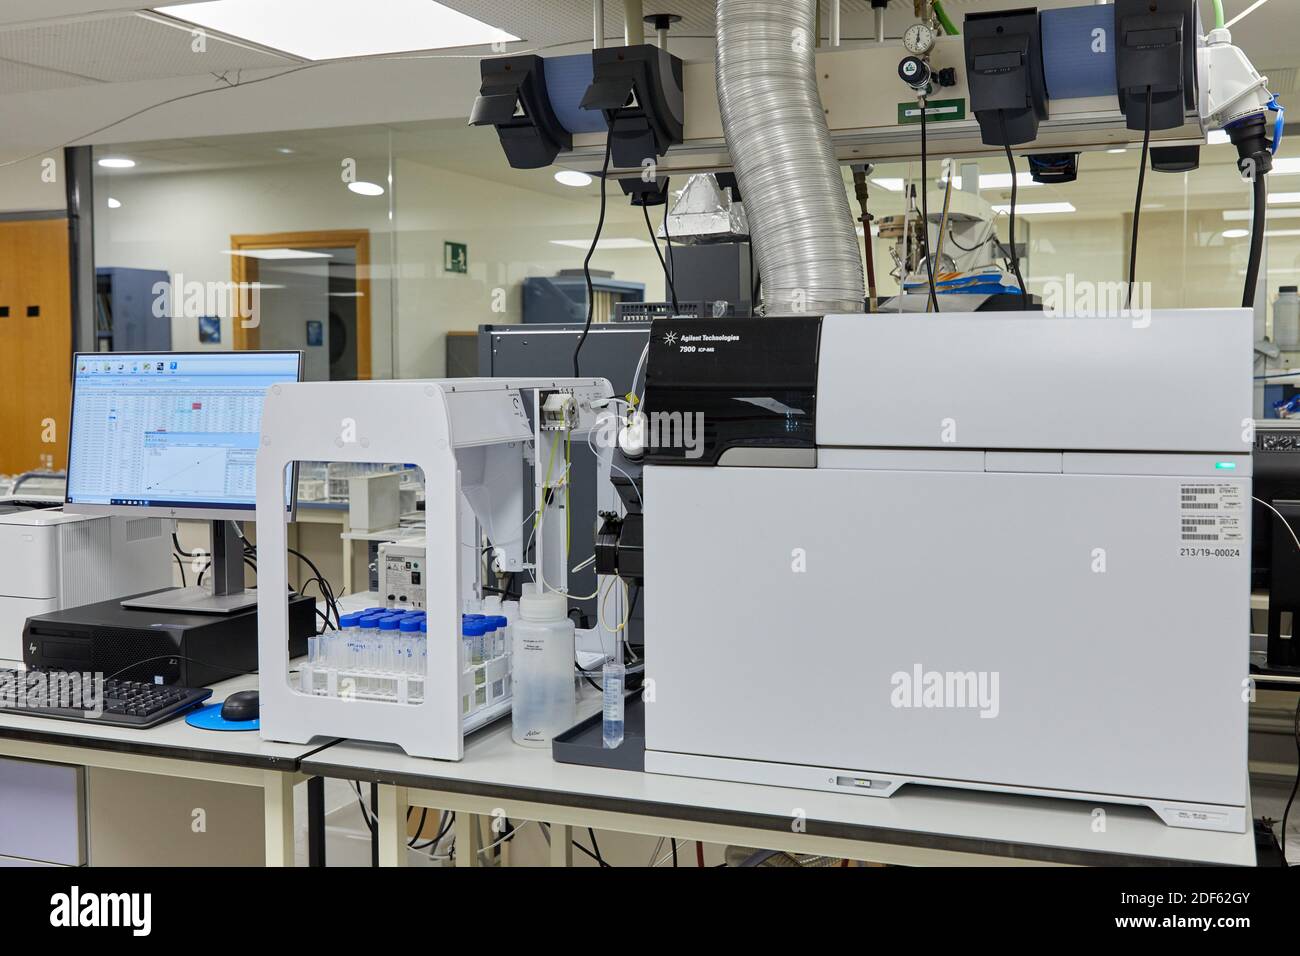 Agilent 7900 ICP-MS, quadrupole mass spectrometry system that provides the industry’s lowest detection limits, widest dynamic range, and most Stock Photo